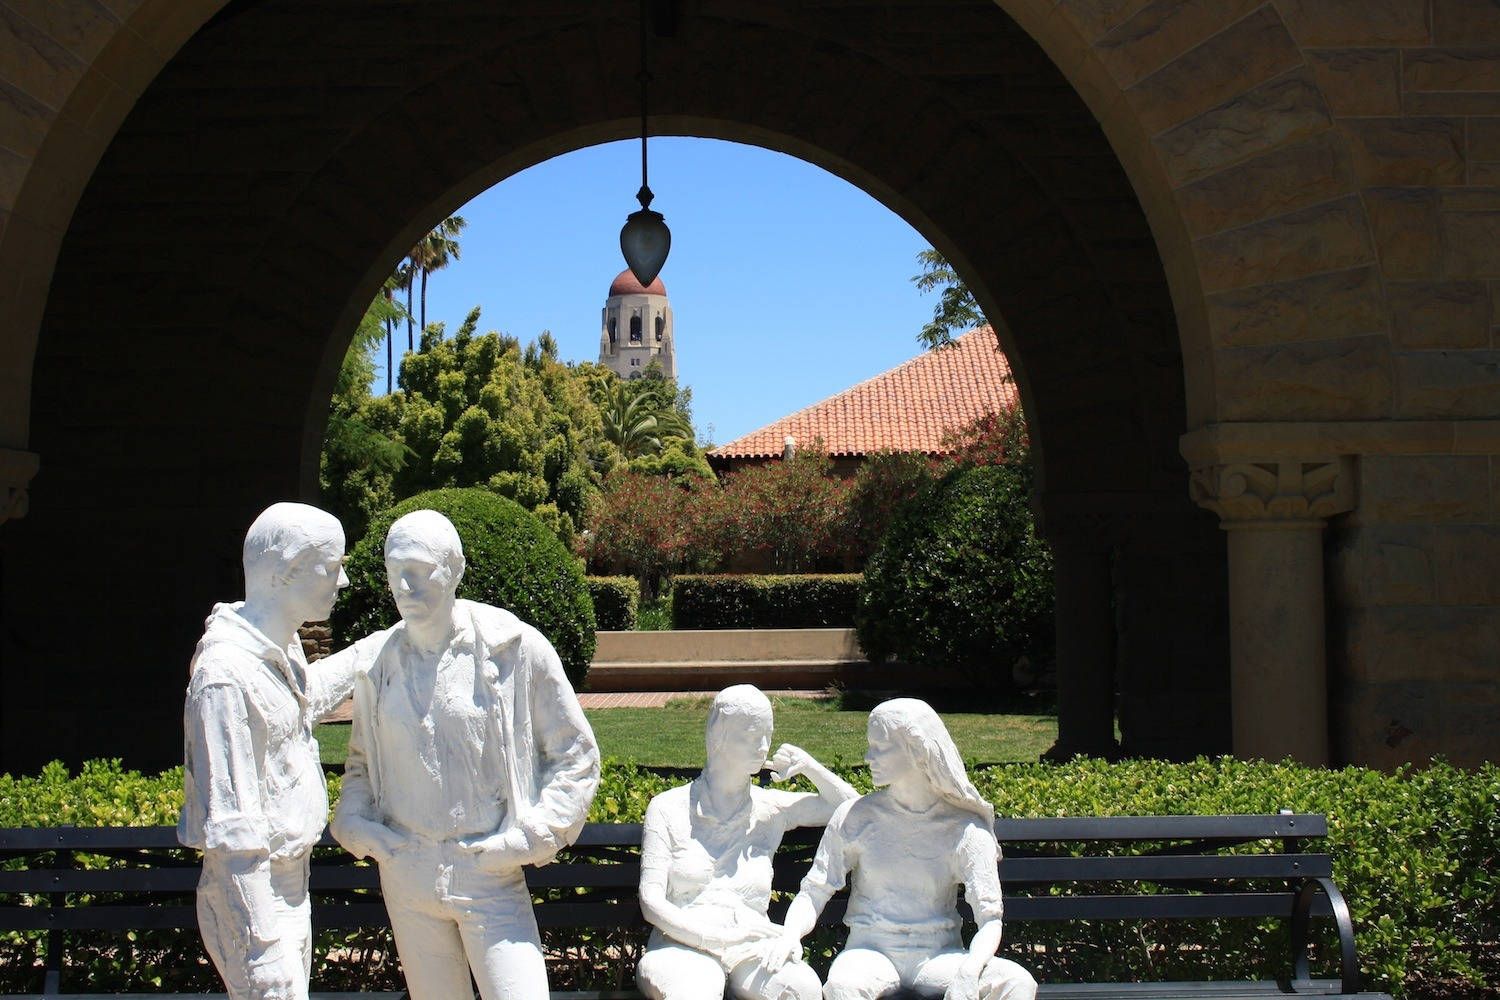 Four white sculptures of students sit on a bench in front of a red-tiled roof and a Stanford clock tower. - Stanford